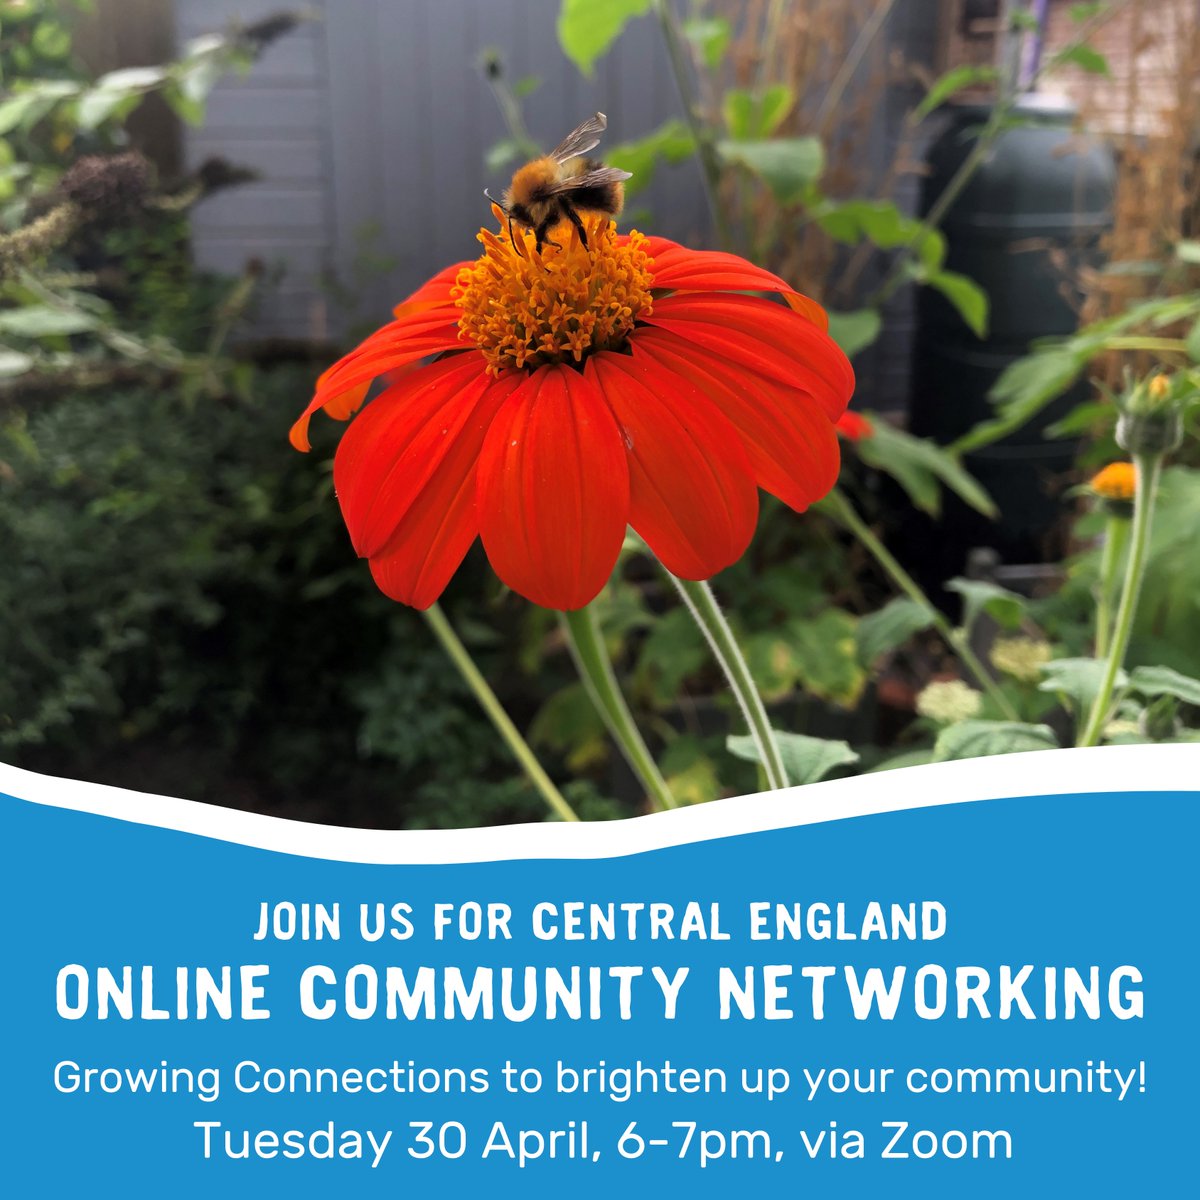 Join @edencommunities for Central England Online Community Networking on Tuesday 30 April. We'll be discussing how we can brighten up our communities and grow connections with some simple ideas. Sign up here: events.more-human.co.uk/event/central-… Look forward to seeing you there! 🌸